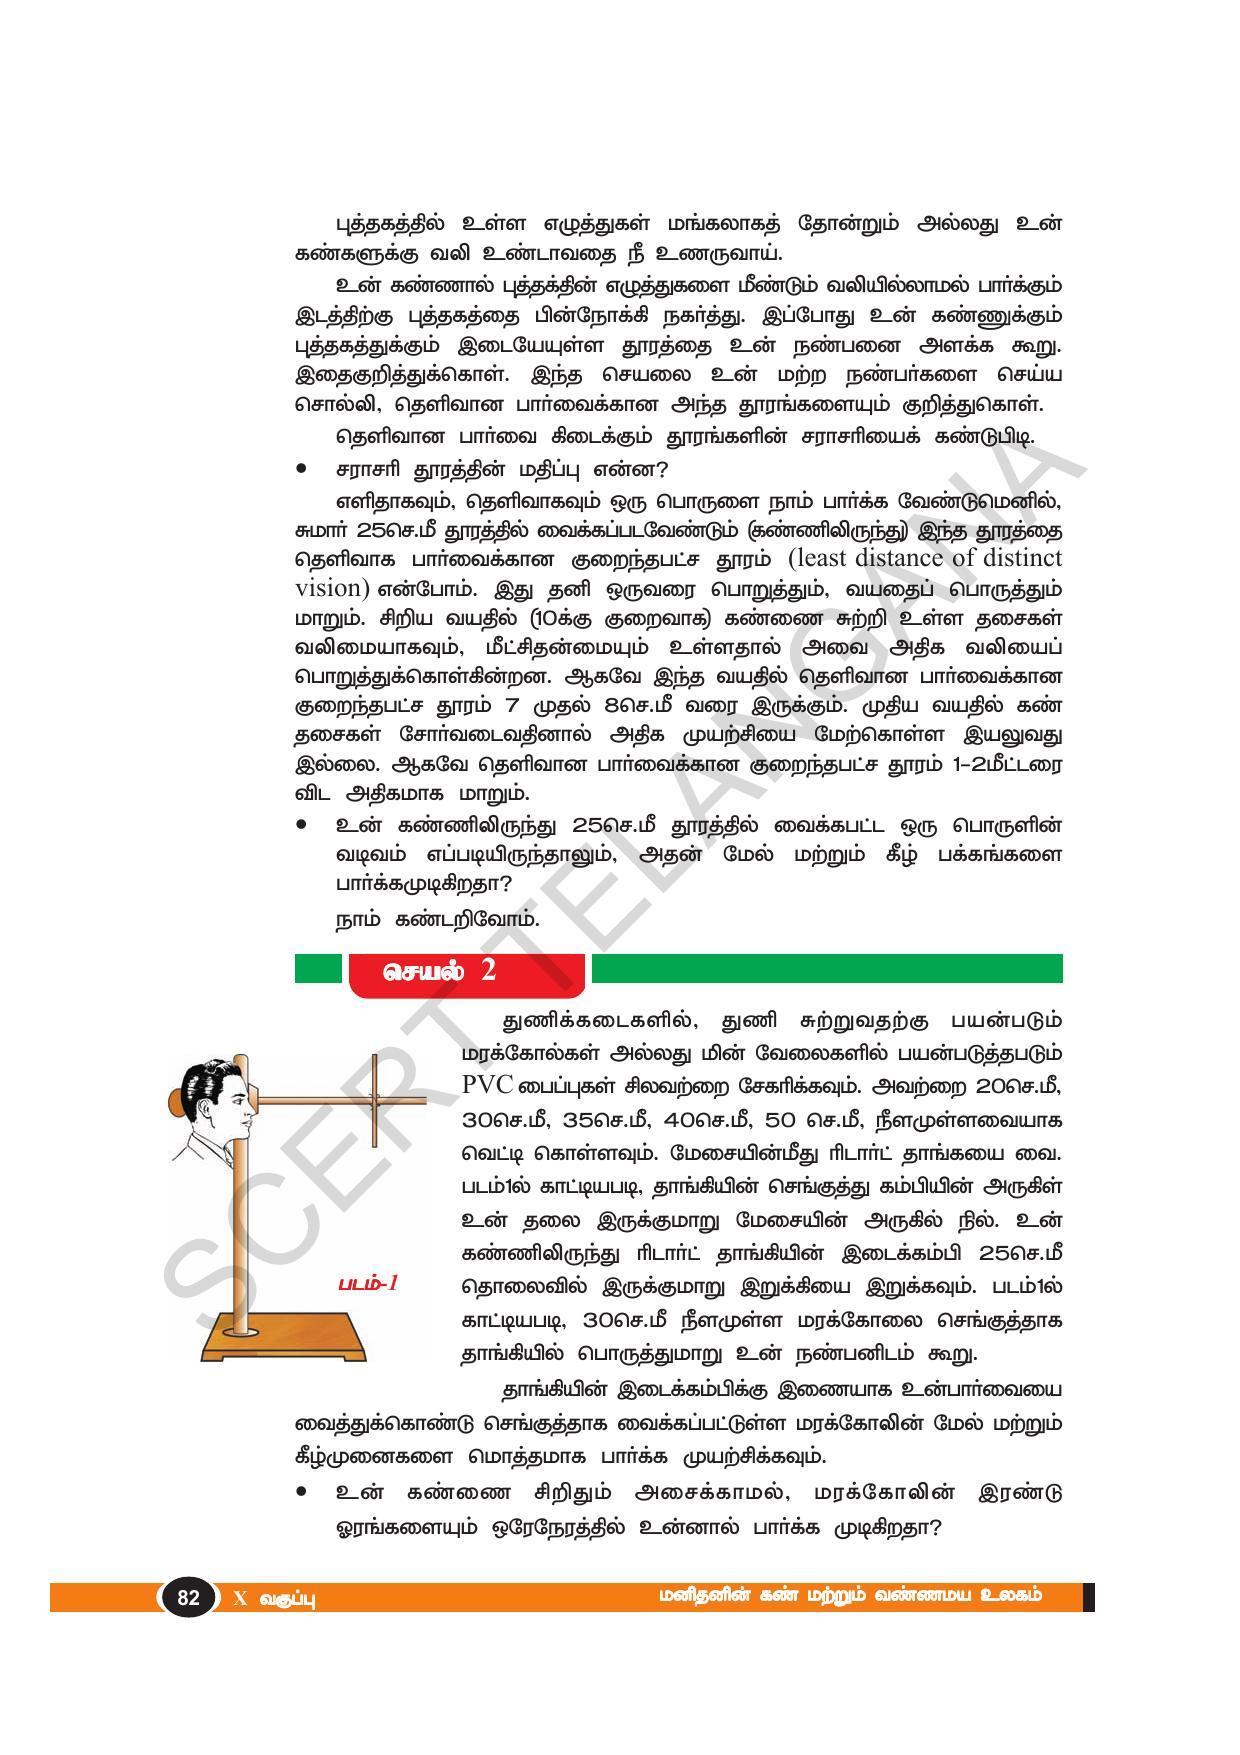 TS SCERT Class 10 Physical Science(Tamil Medium) Text Book - Page 94